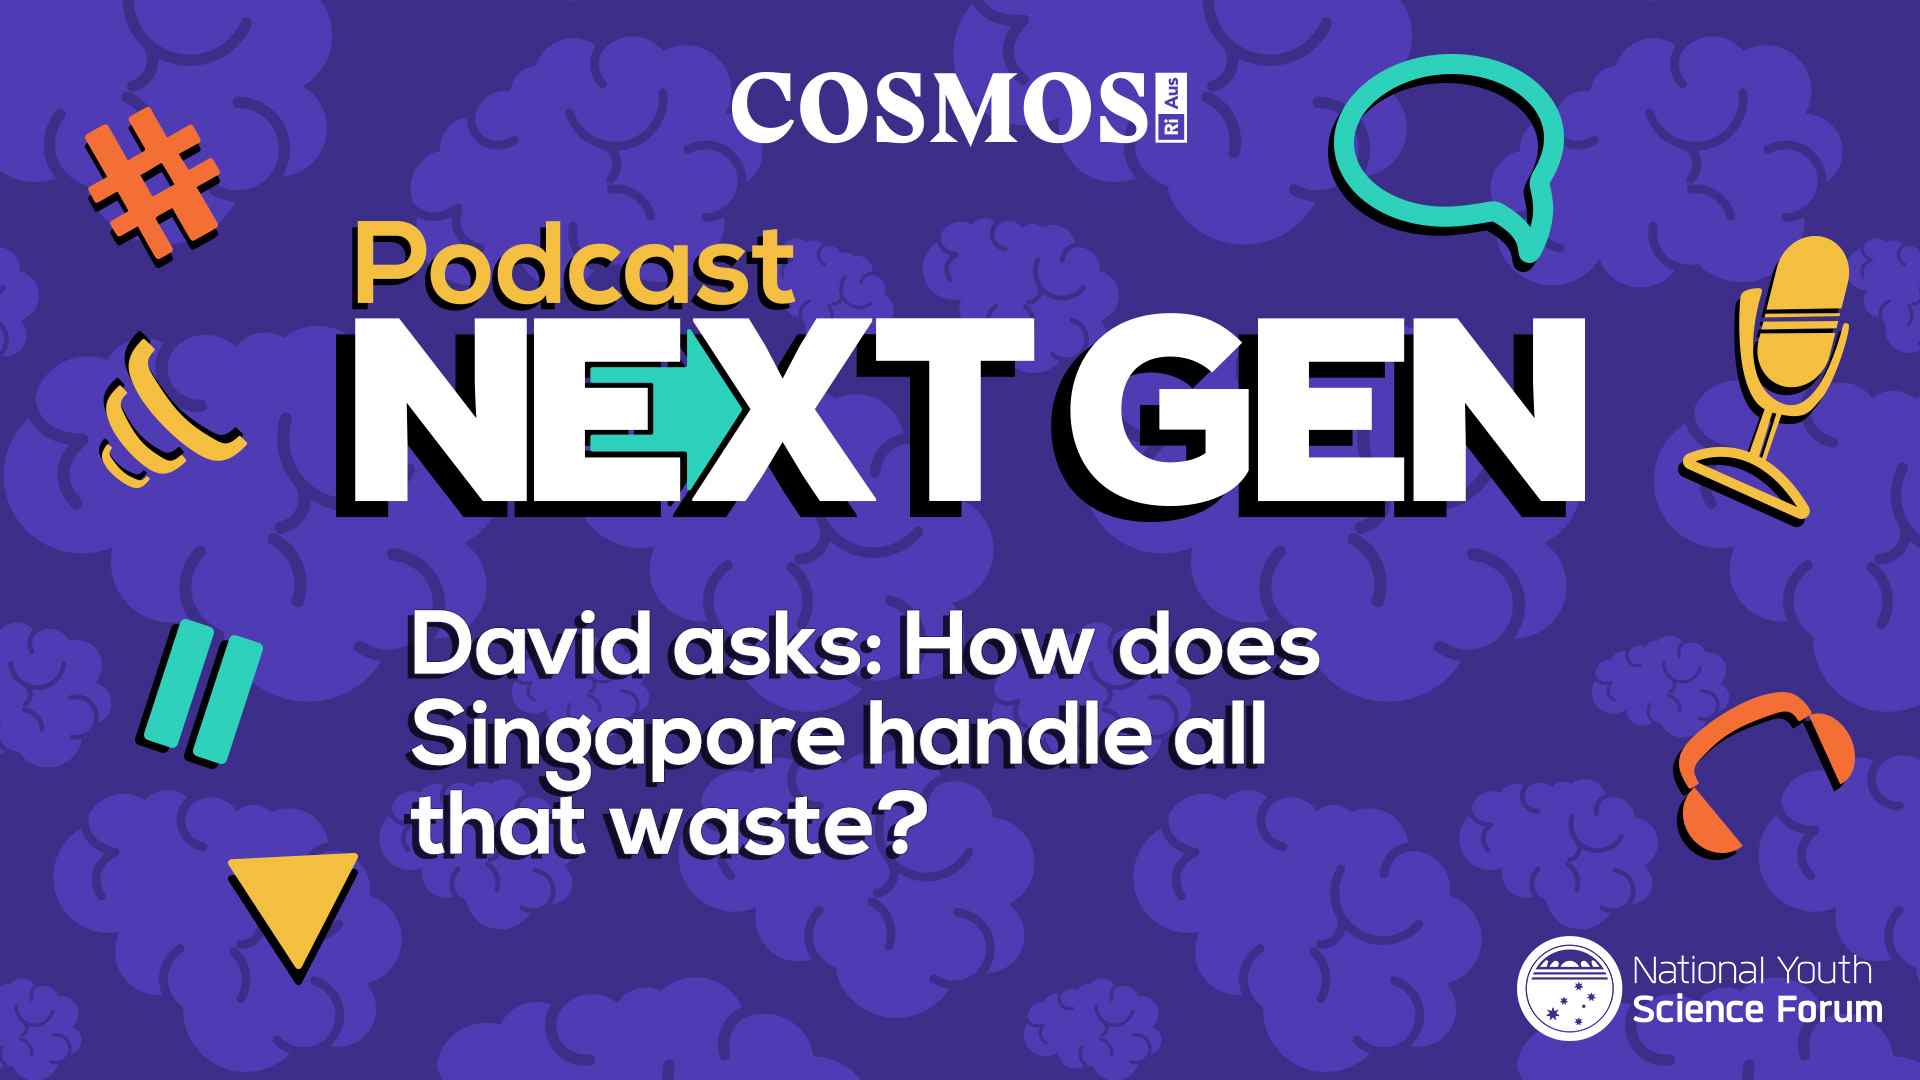 PODCAST NEXT GEN: How does Singapore do waste management differently?